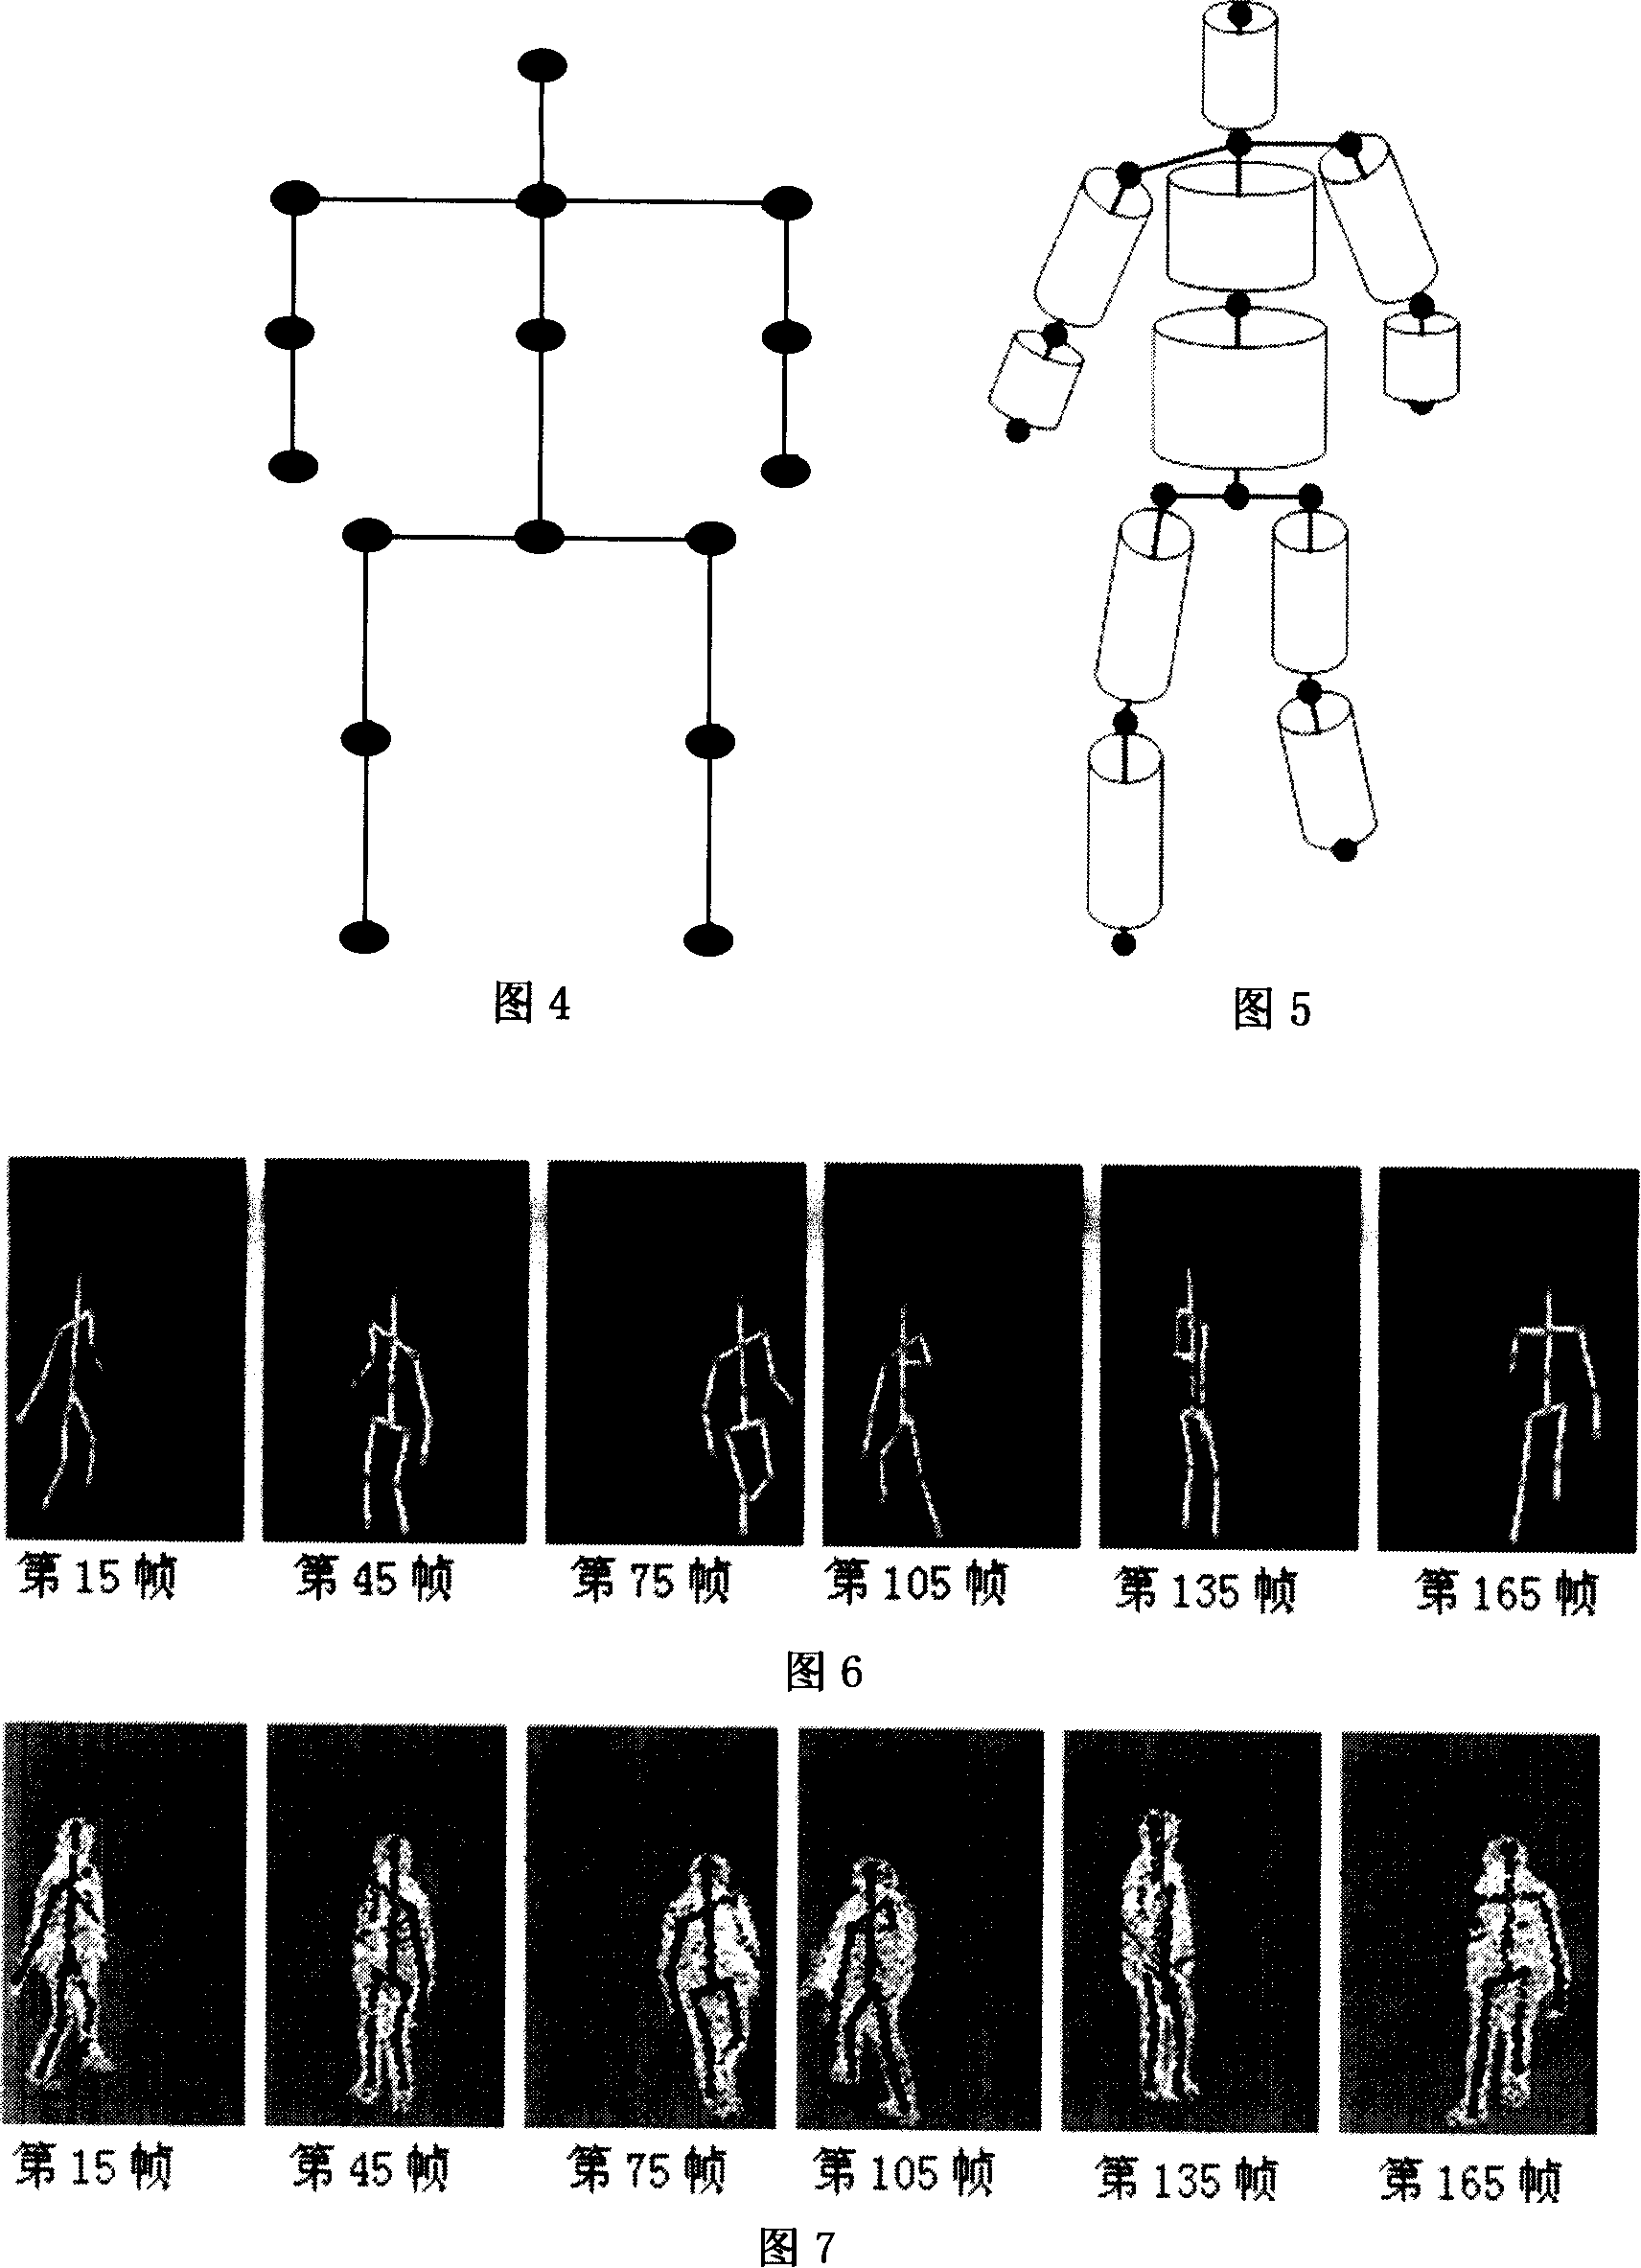 Method for tracing three-dimensional human body movement based on multi-camera